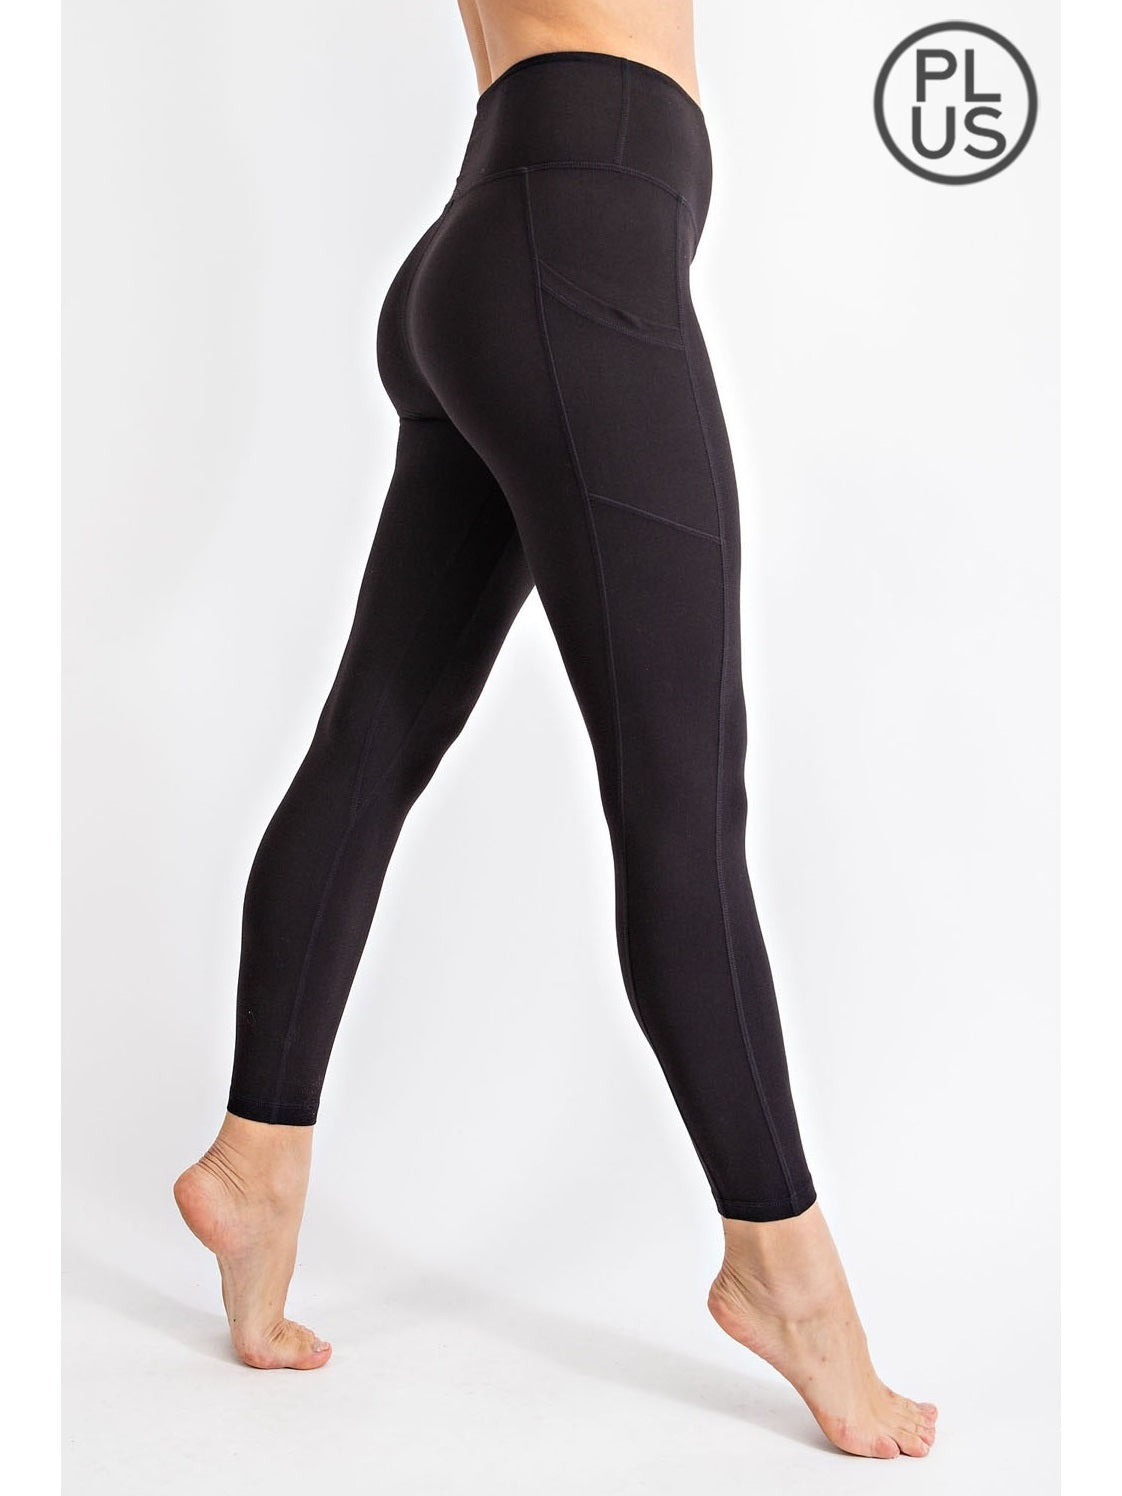 Rae Mode l Black Seamless Butter Soft Leggings with Pockets [P6169